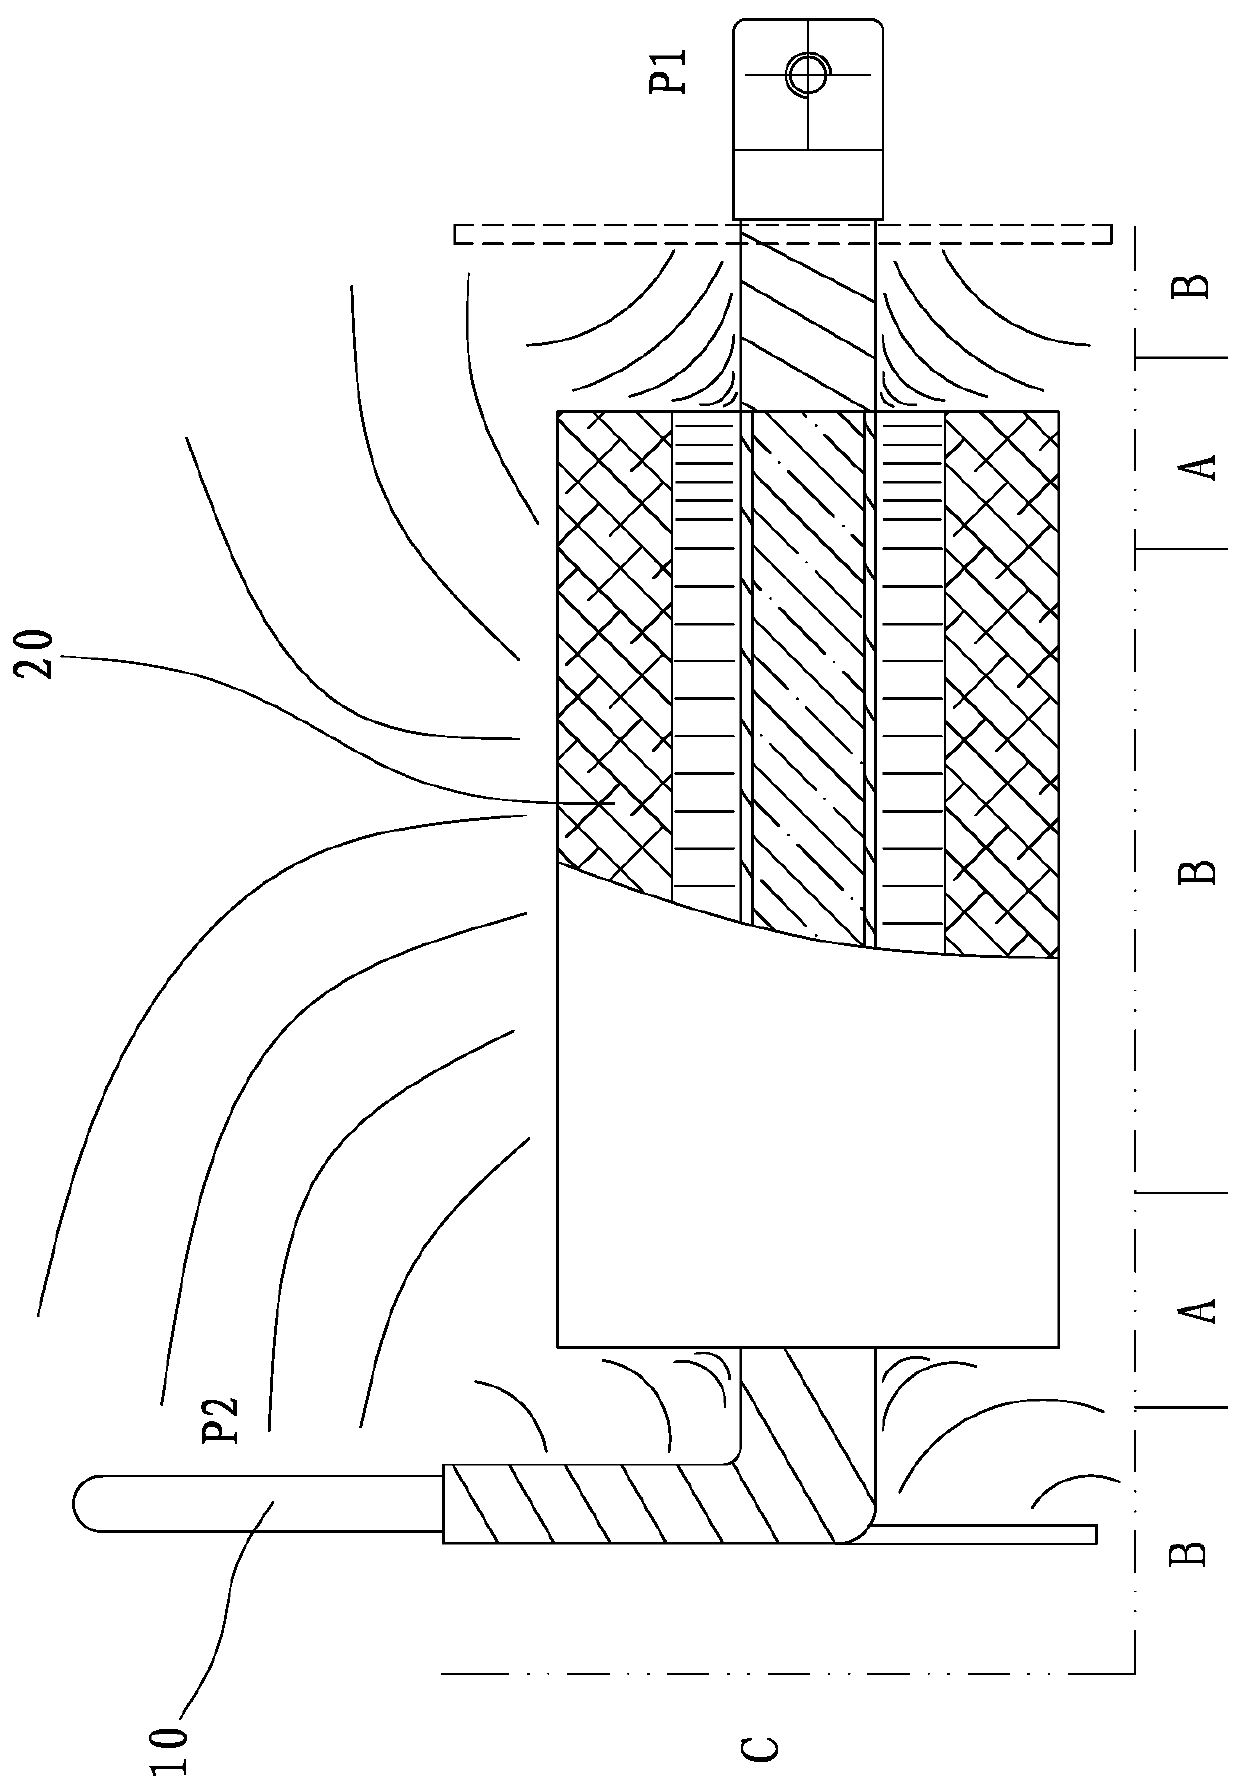 The Method of Equalizing the Field Strength Inside the Medium-Voltage Transformer